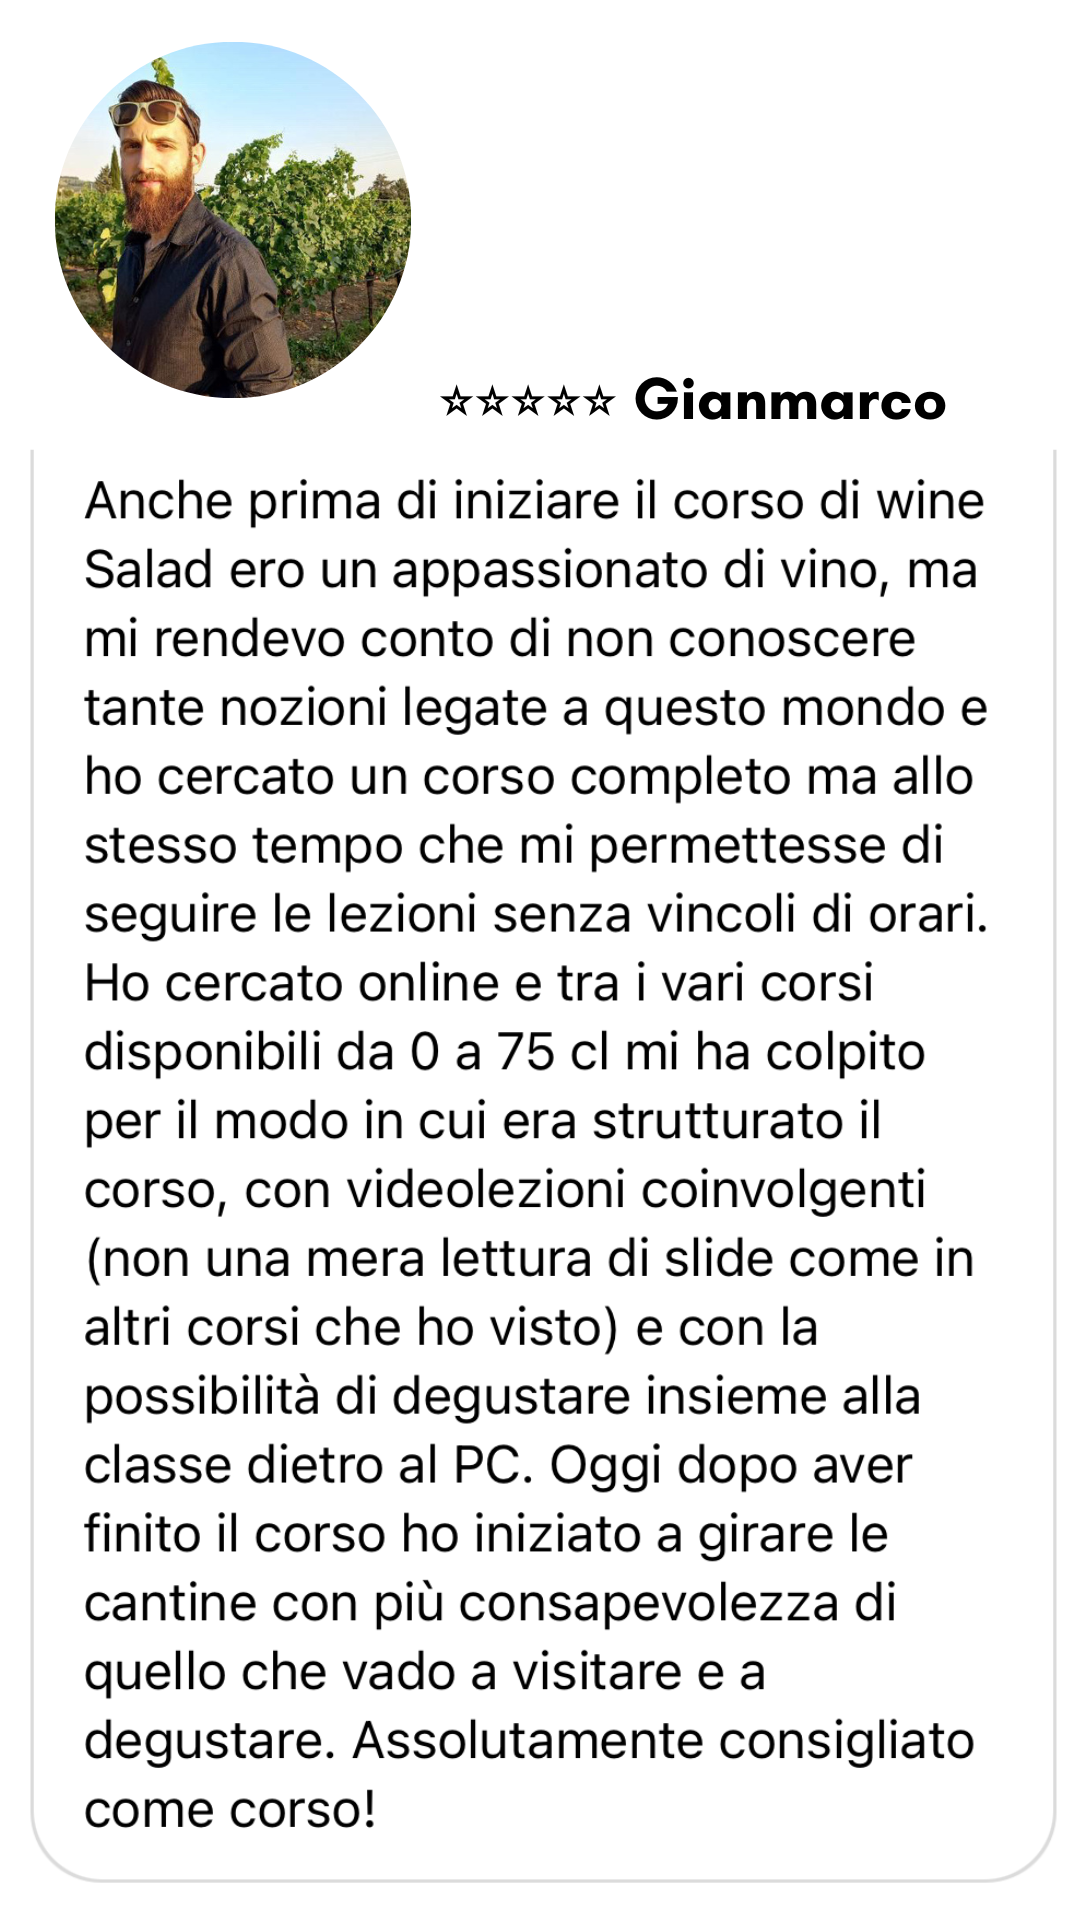 Recensione Gianmarco.png